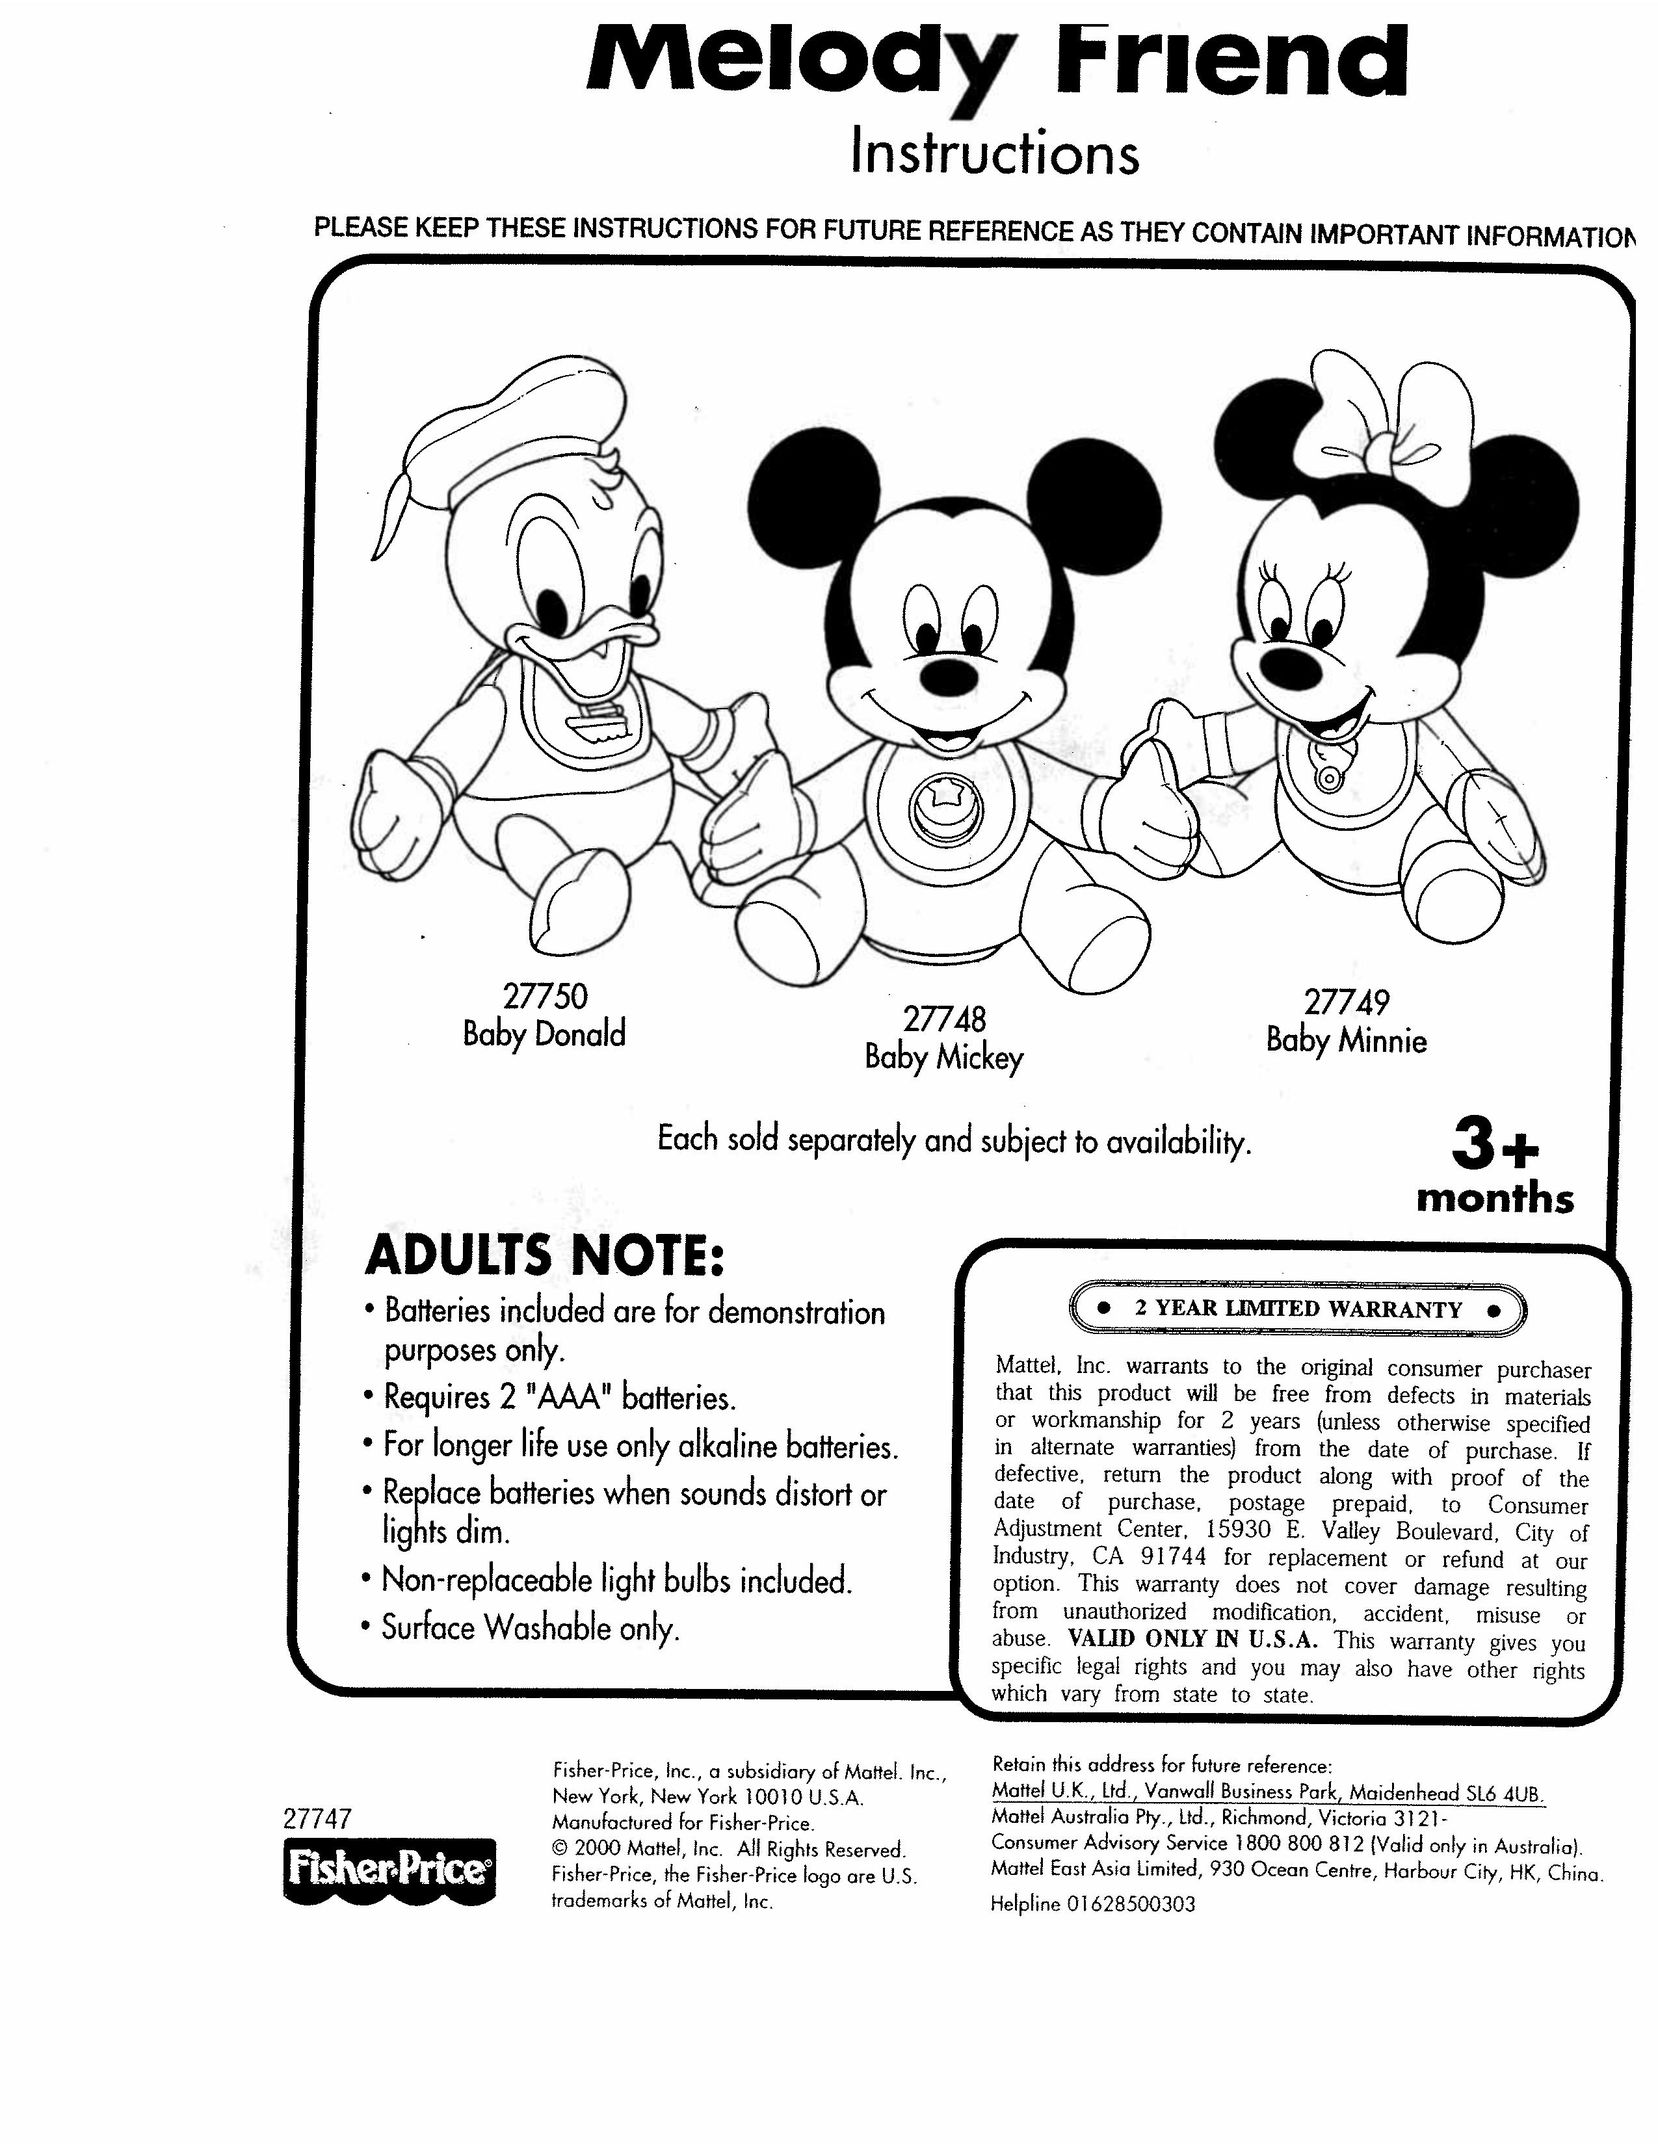 Fisher-Price 27750 Baby Toy User Manual